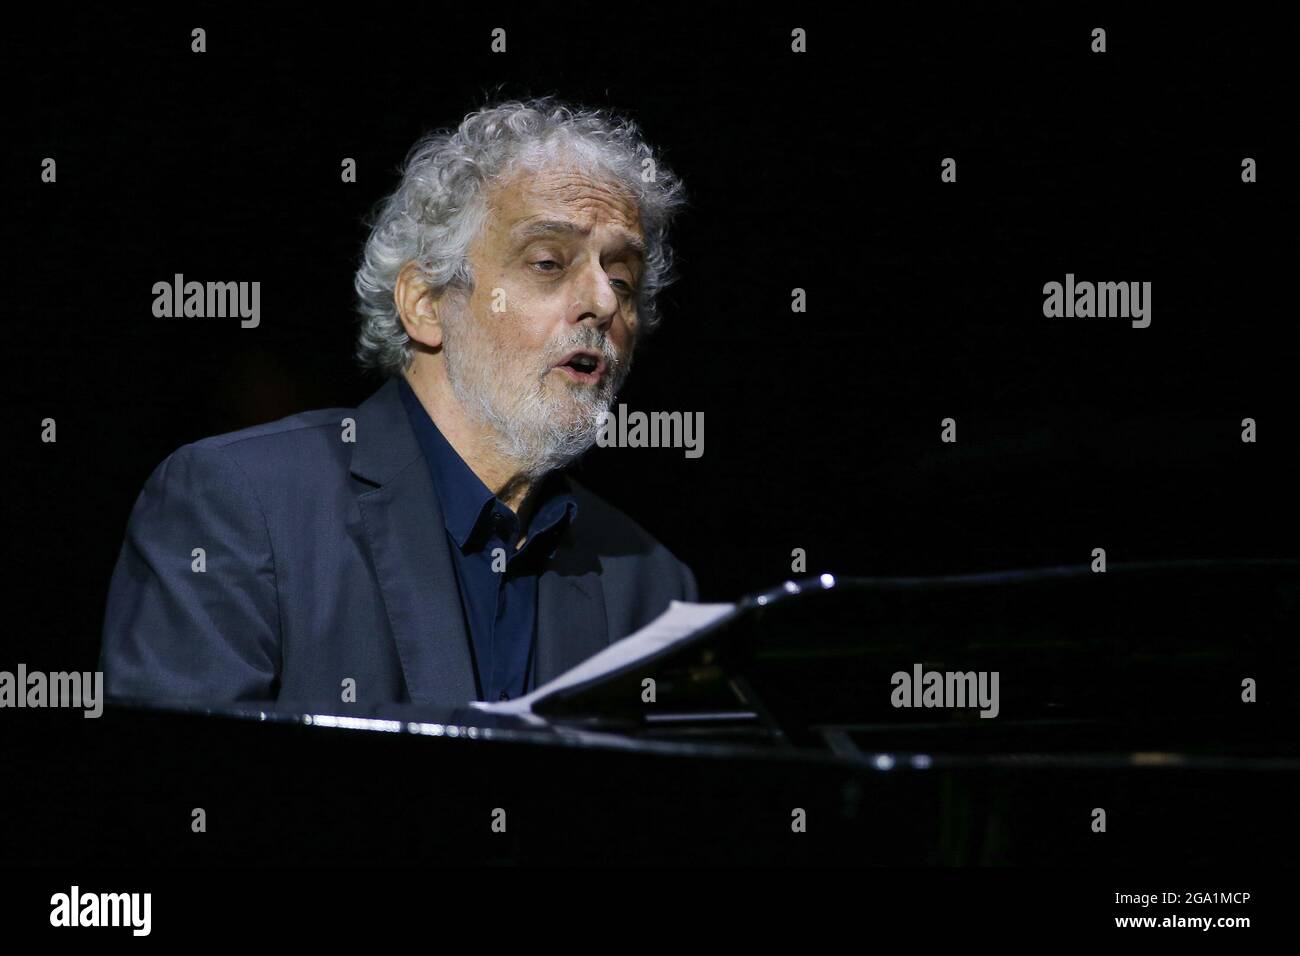 The musician and composer, Nicola Piovani, during the concert at the Trianon Viviani theater in Naples. Stock Photo